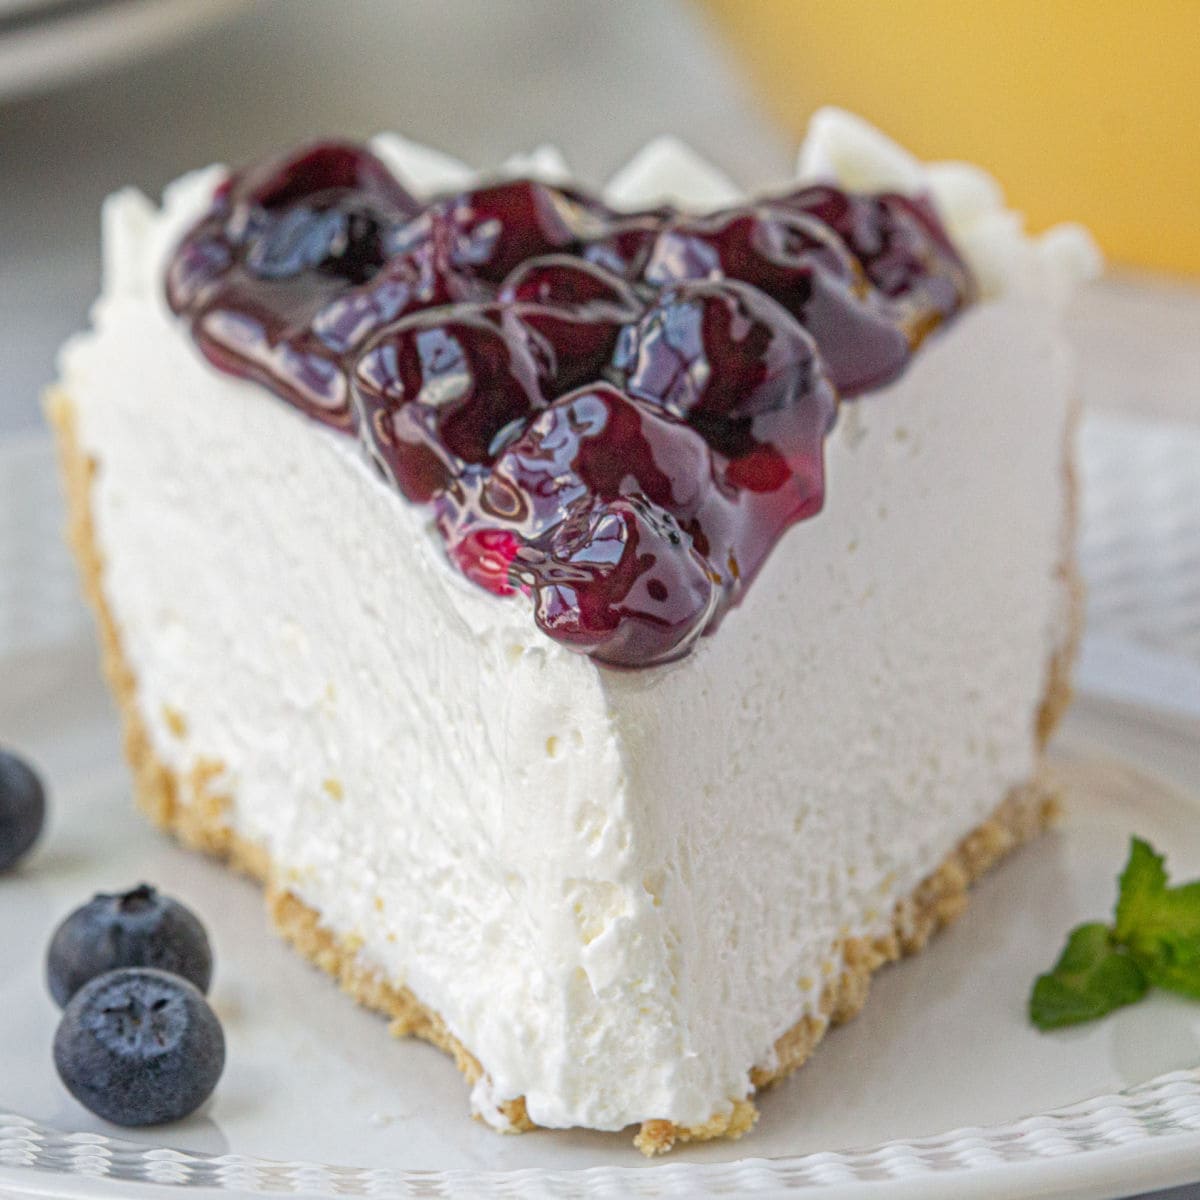 Closeup of a slice of cheesecake showing the sweet blueberry topping.